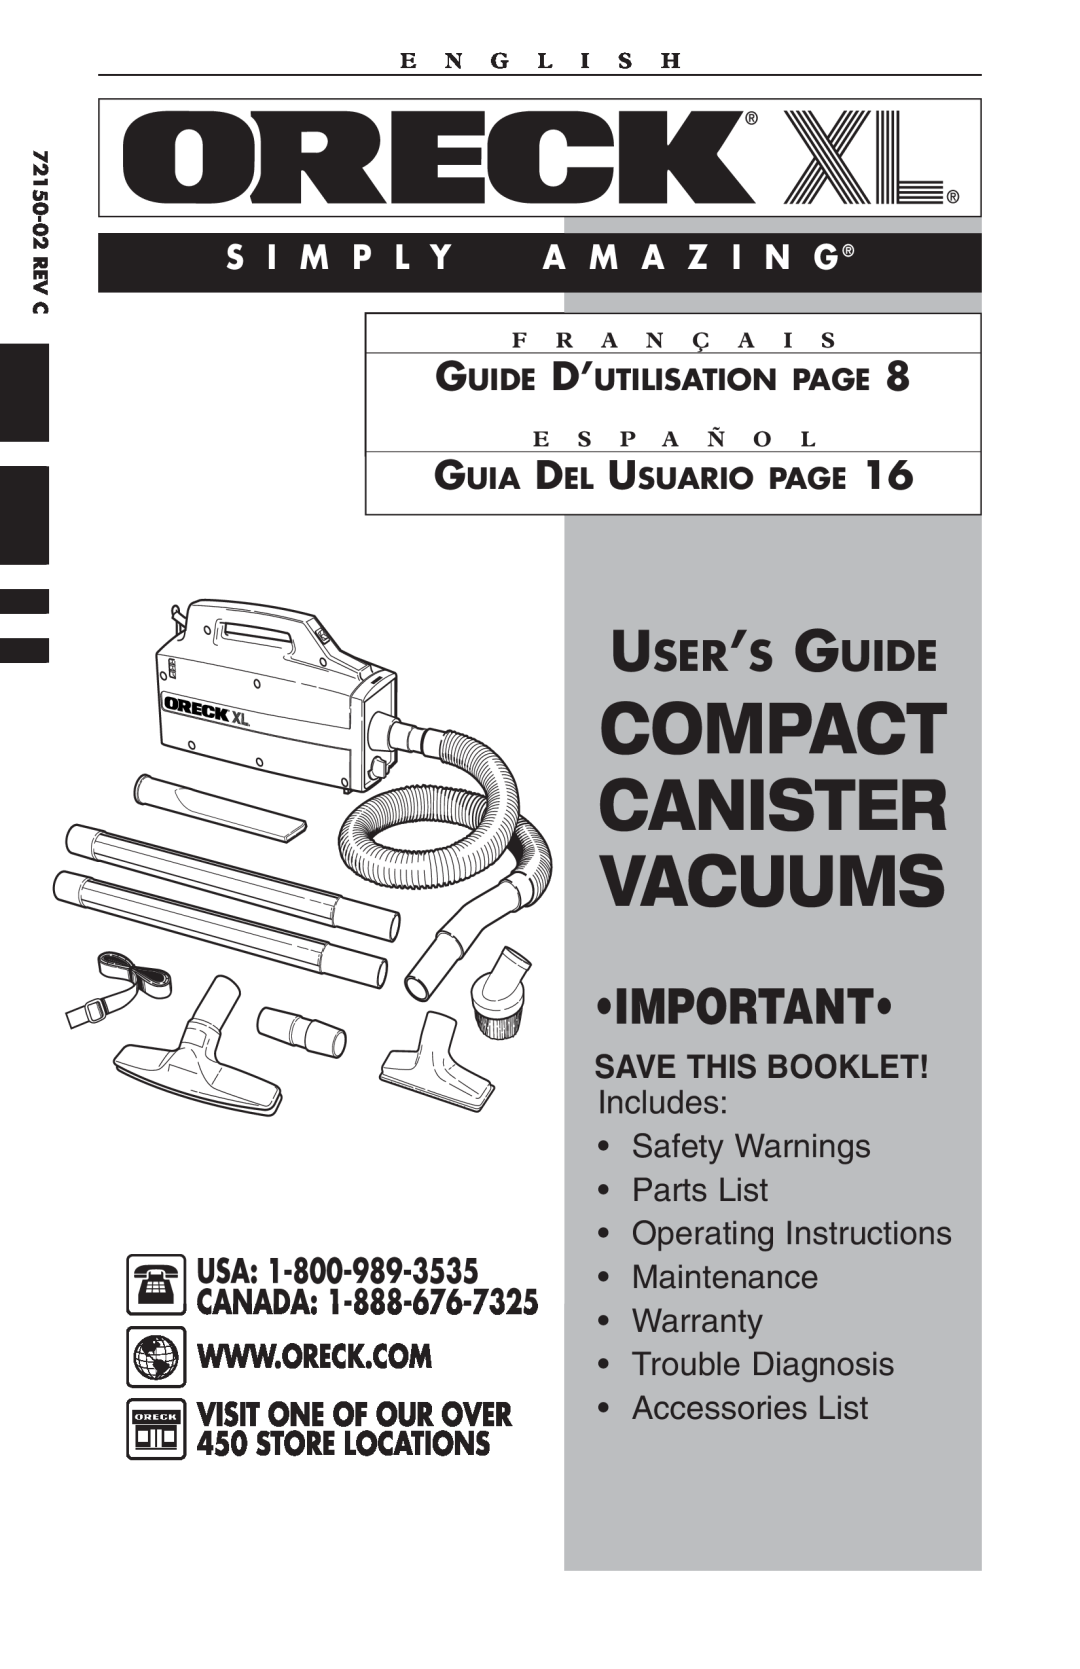 Oreck compact canister Vaccum warranty User’S Guide, S I M P L Y, A M A Z I N G, Compact Canister Vacuums, E N G L I S H 